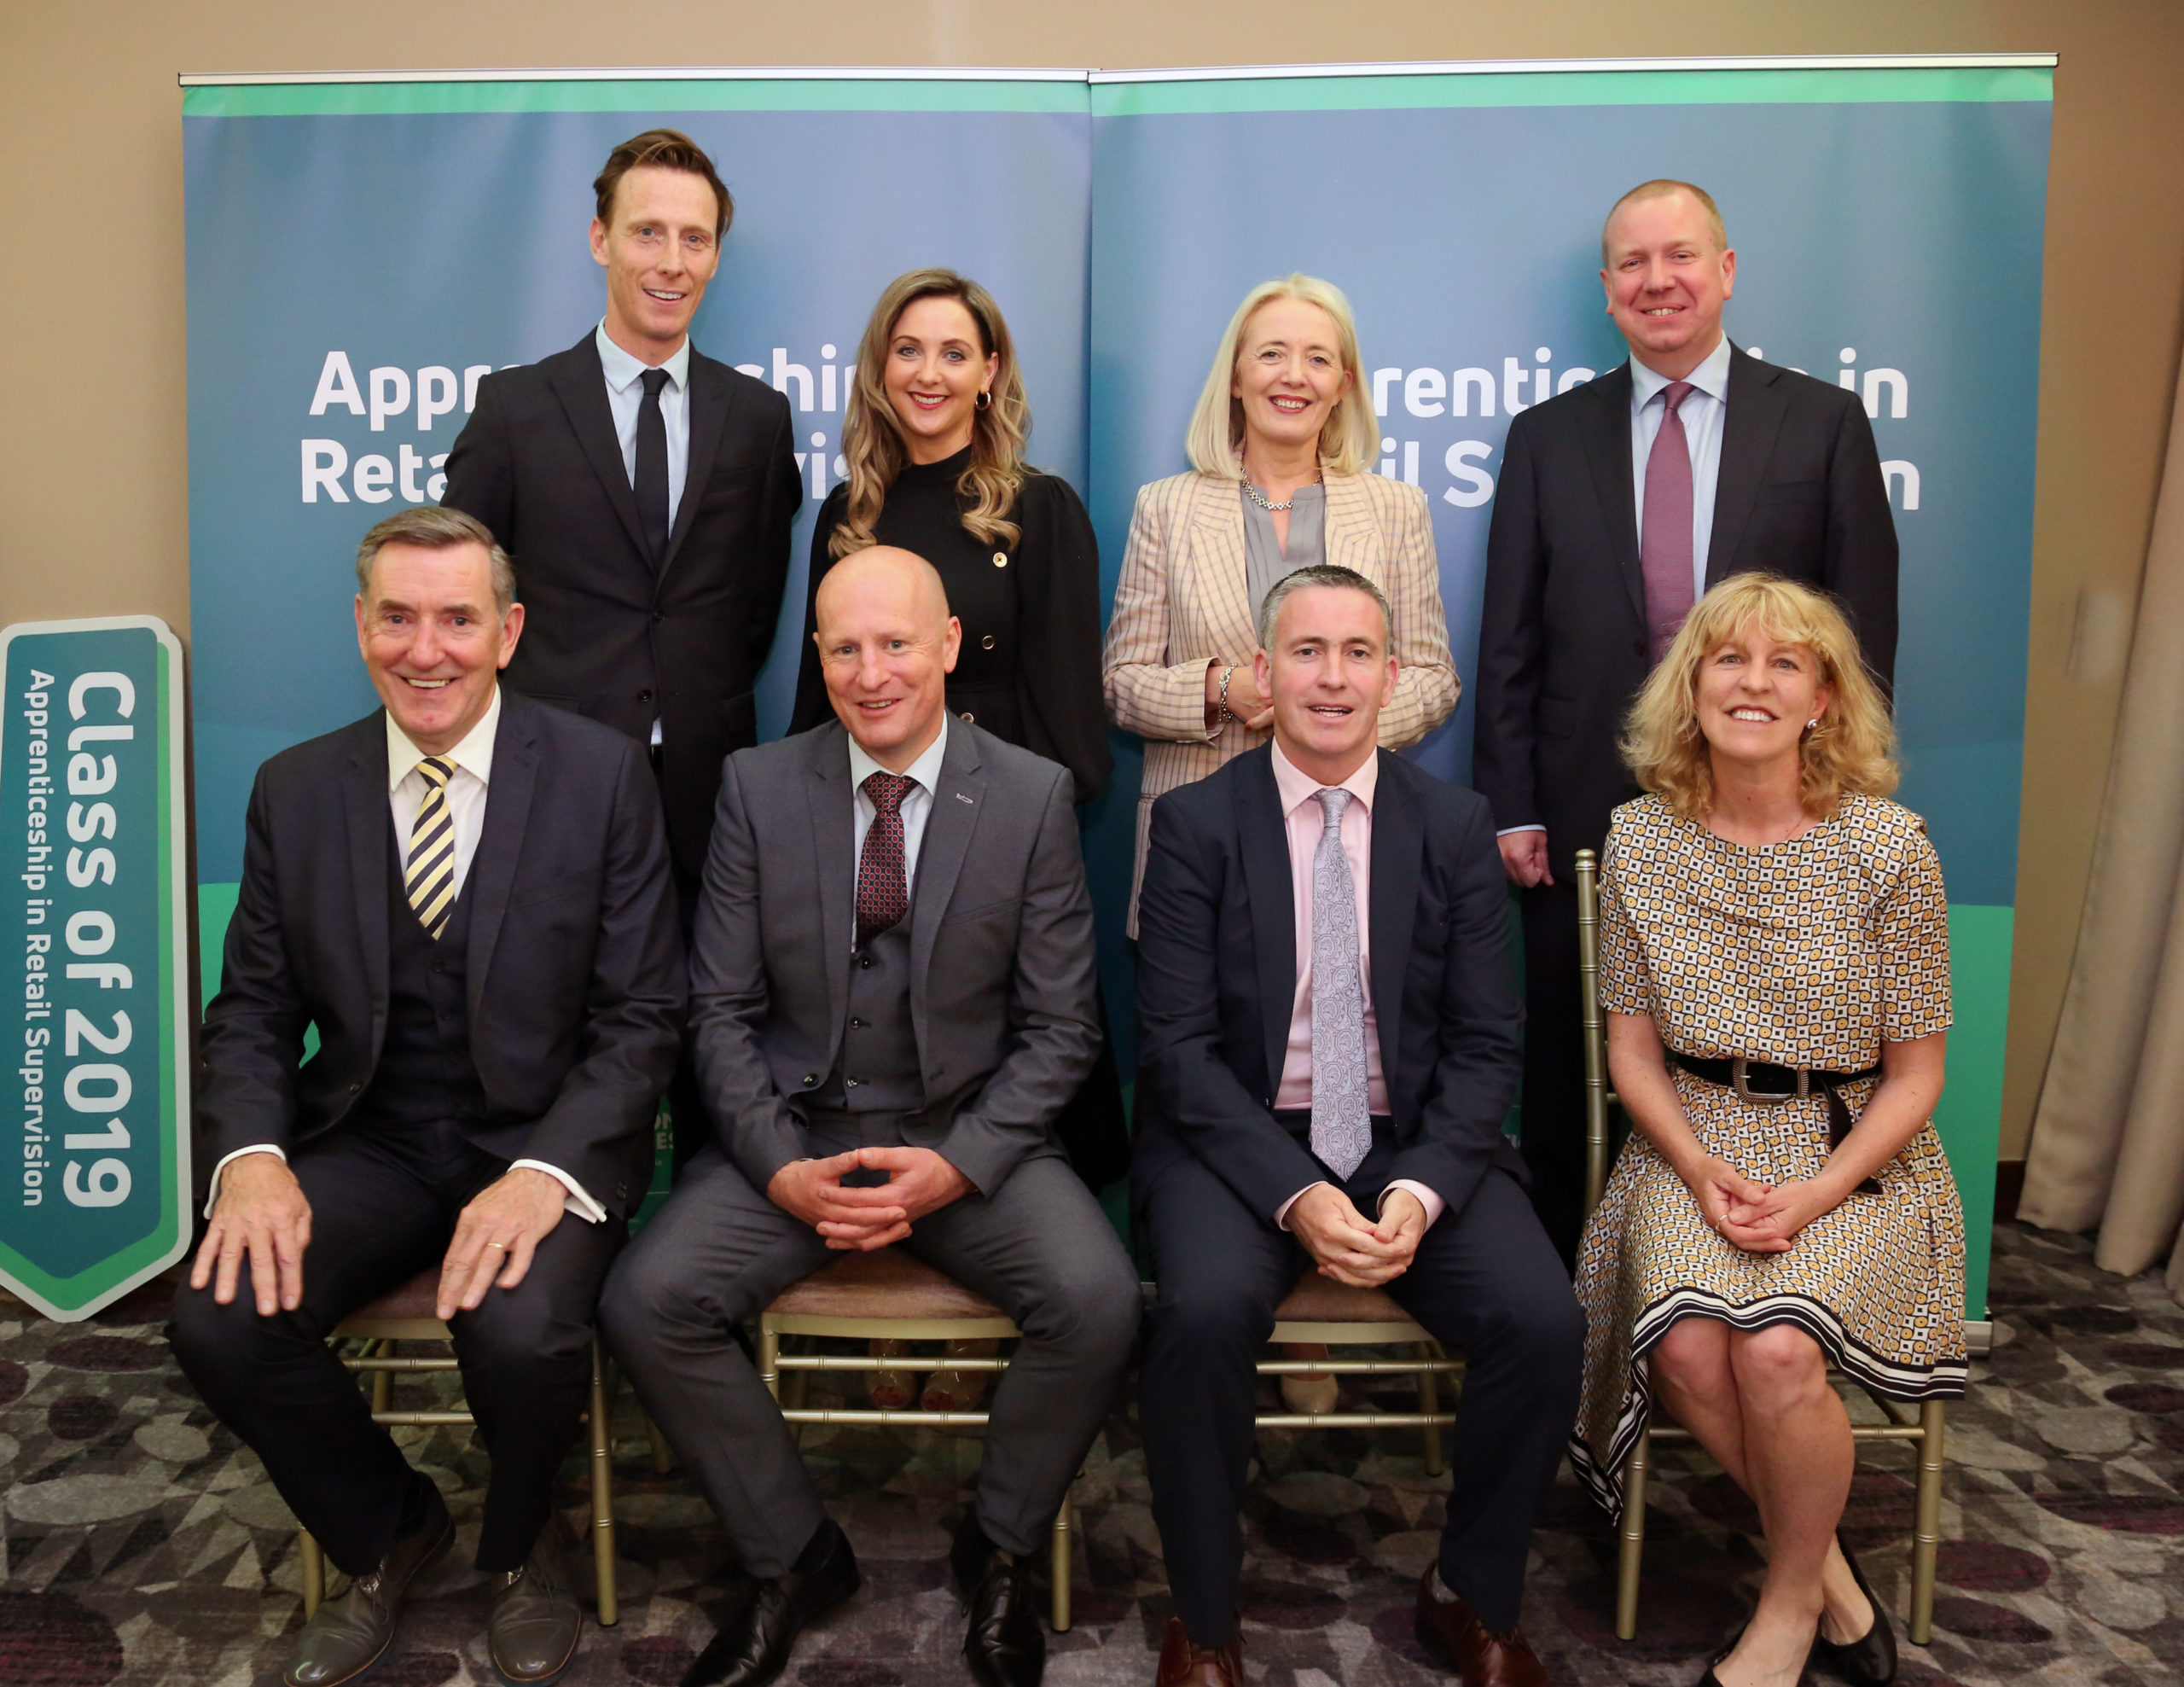 Apprenticeship in Retail Supervision Graduation Day Class of 2019